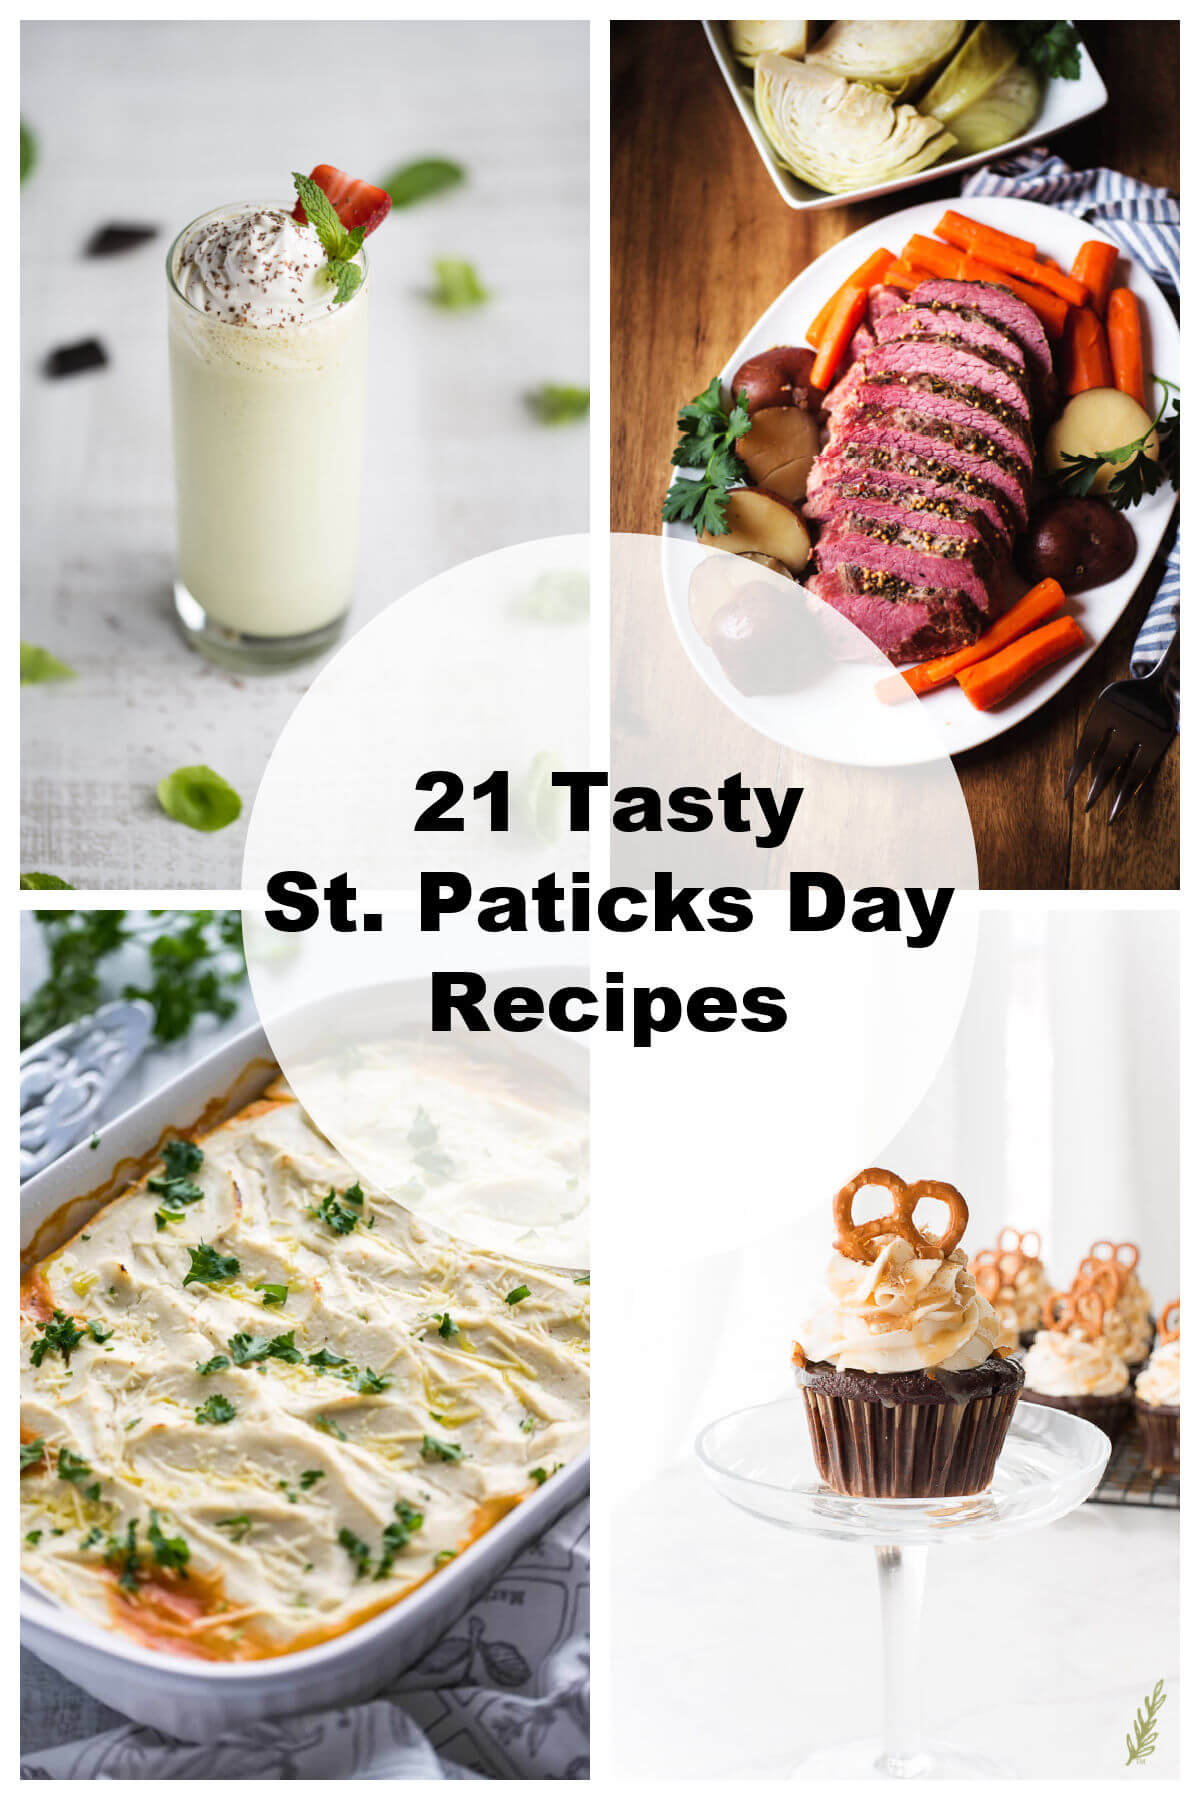 collage of 4 photos showing st. patricks day recipes: shamrock shake, corned beef, cottage pie, and chocolate stout cupcakes